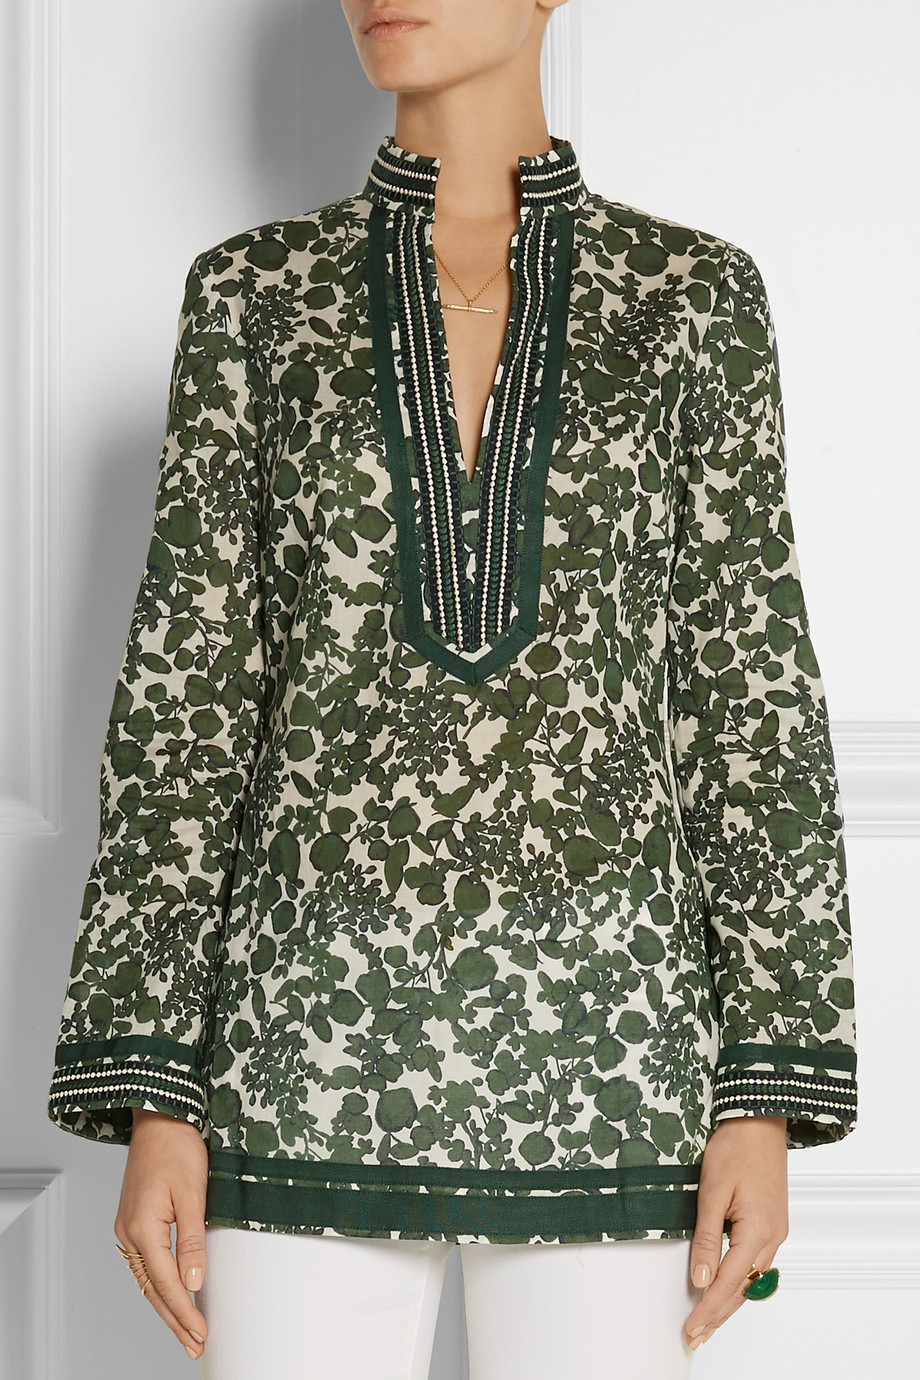 Lyst - Tory burch Tory Floral-Print Cotton-Voile Tunic in Green